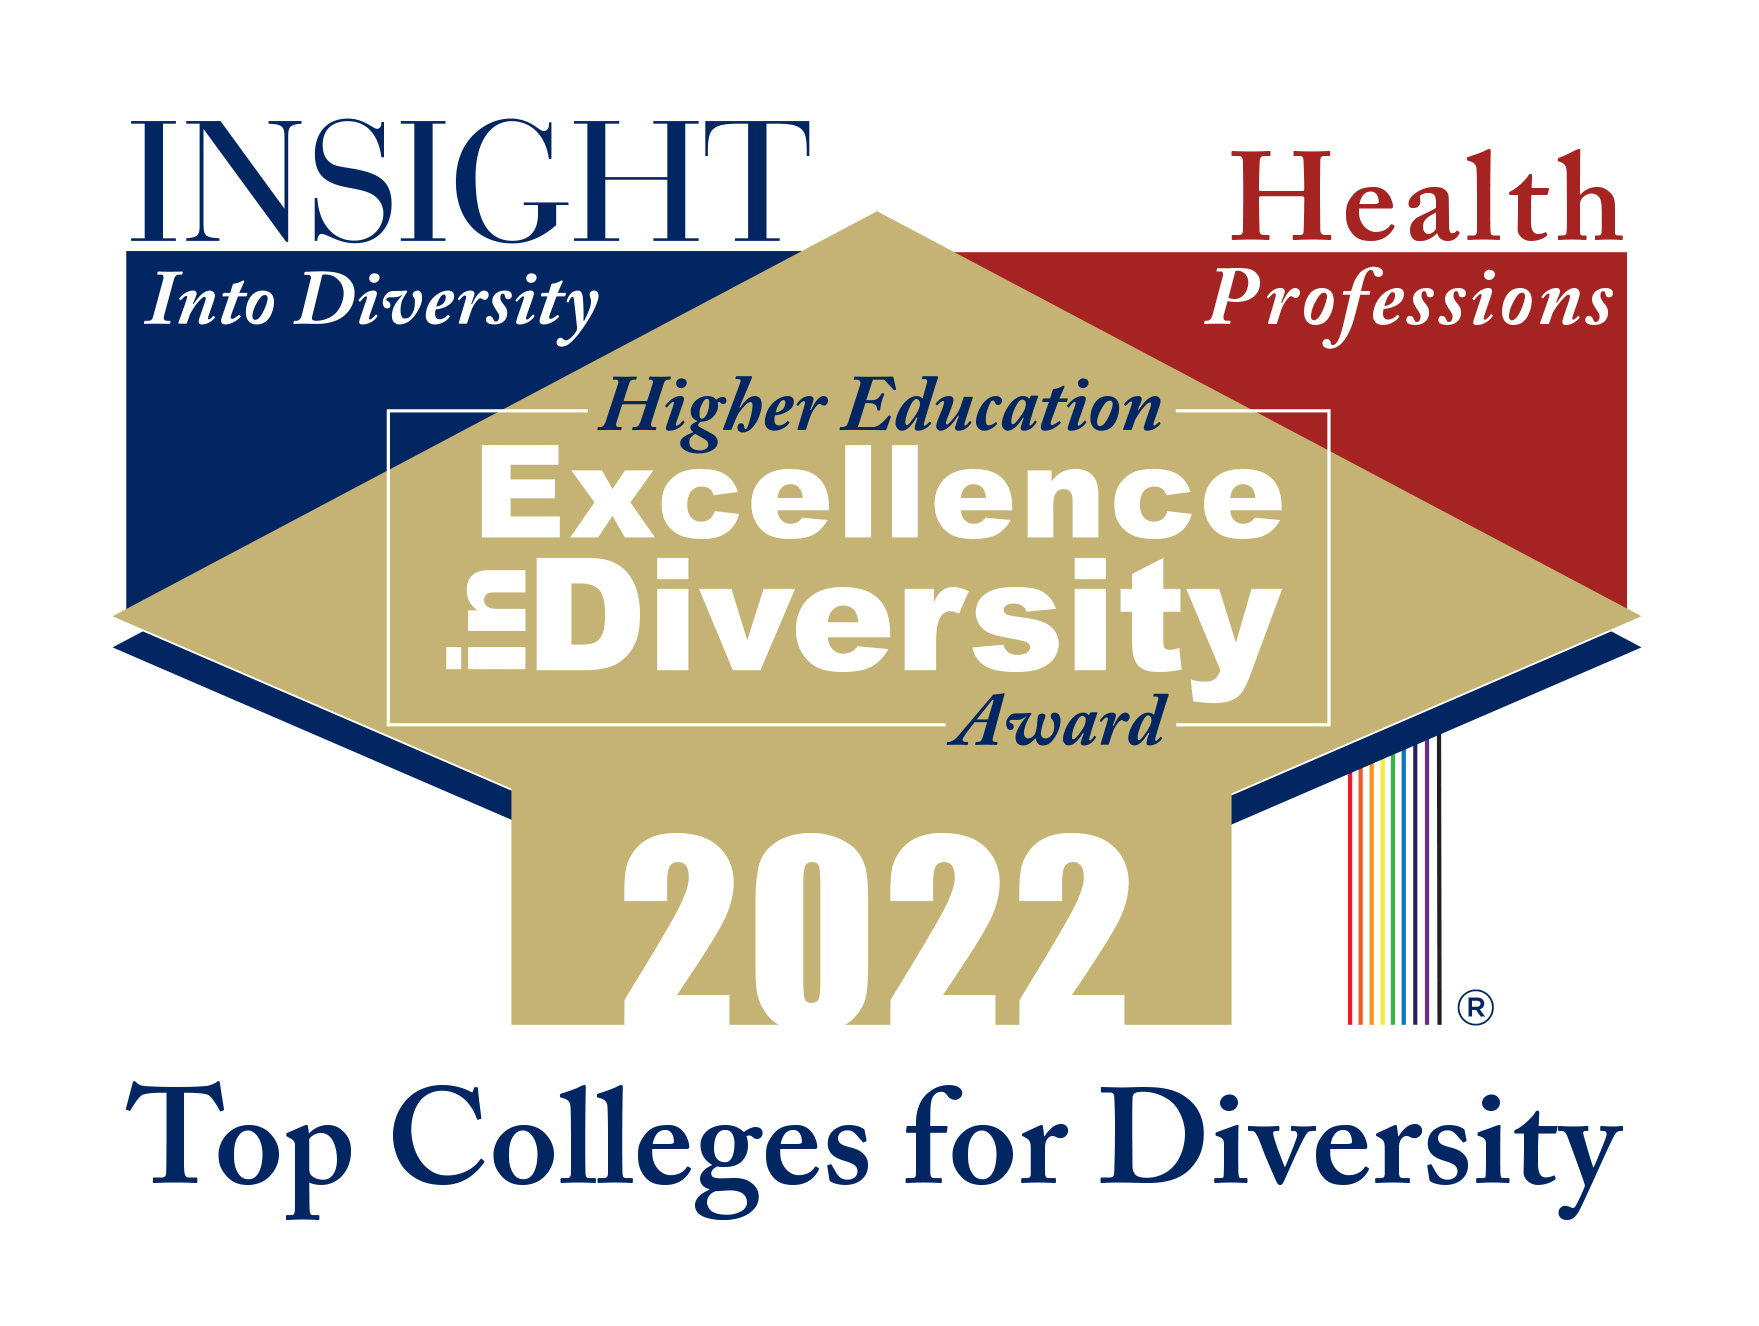 Higher Education Excellence in Diversity Award 2022 width=